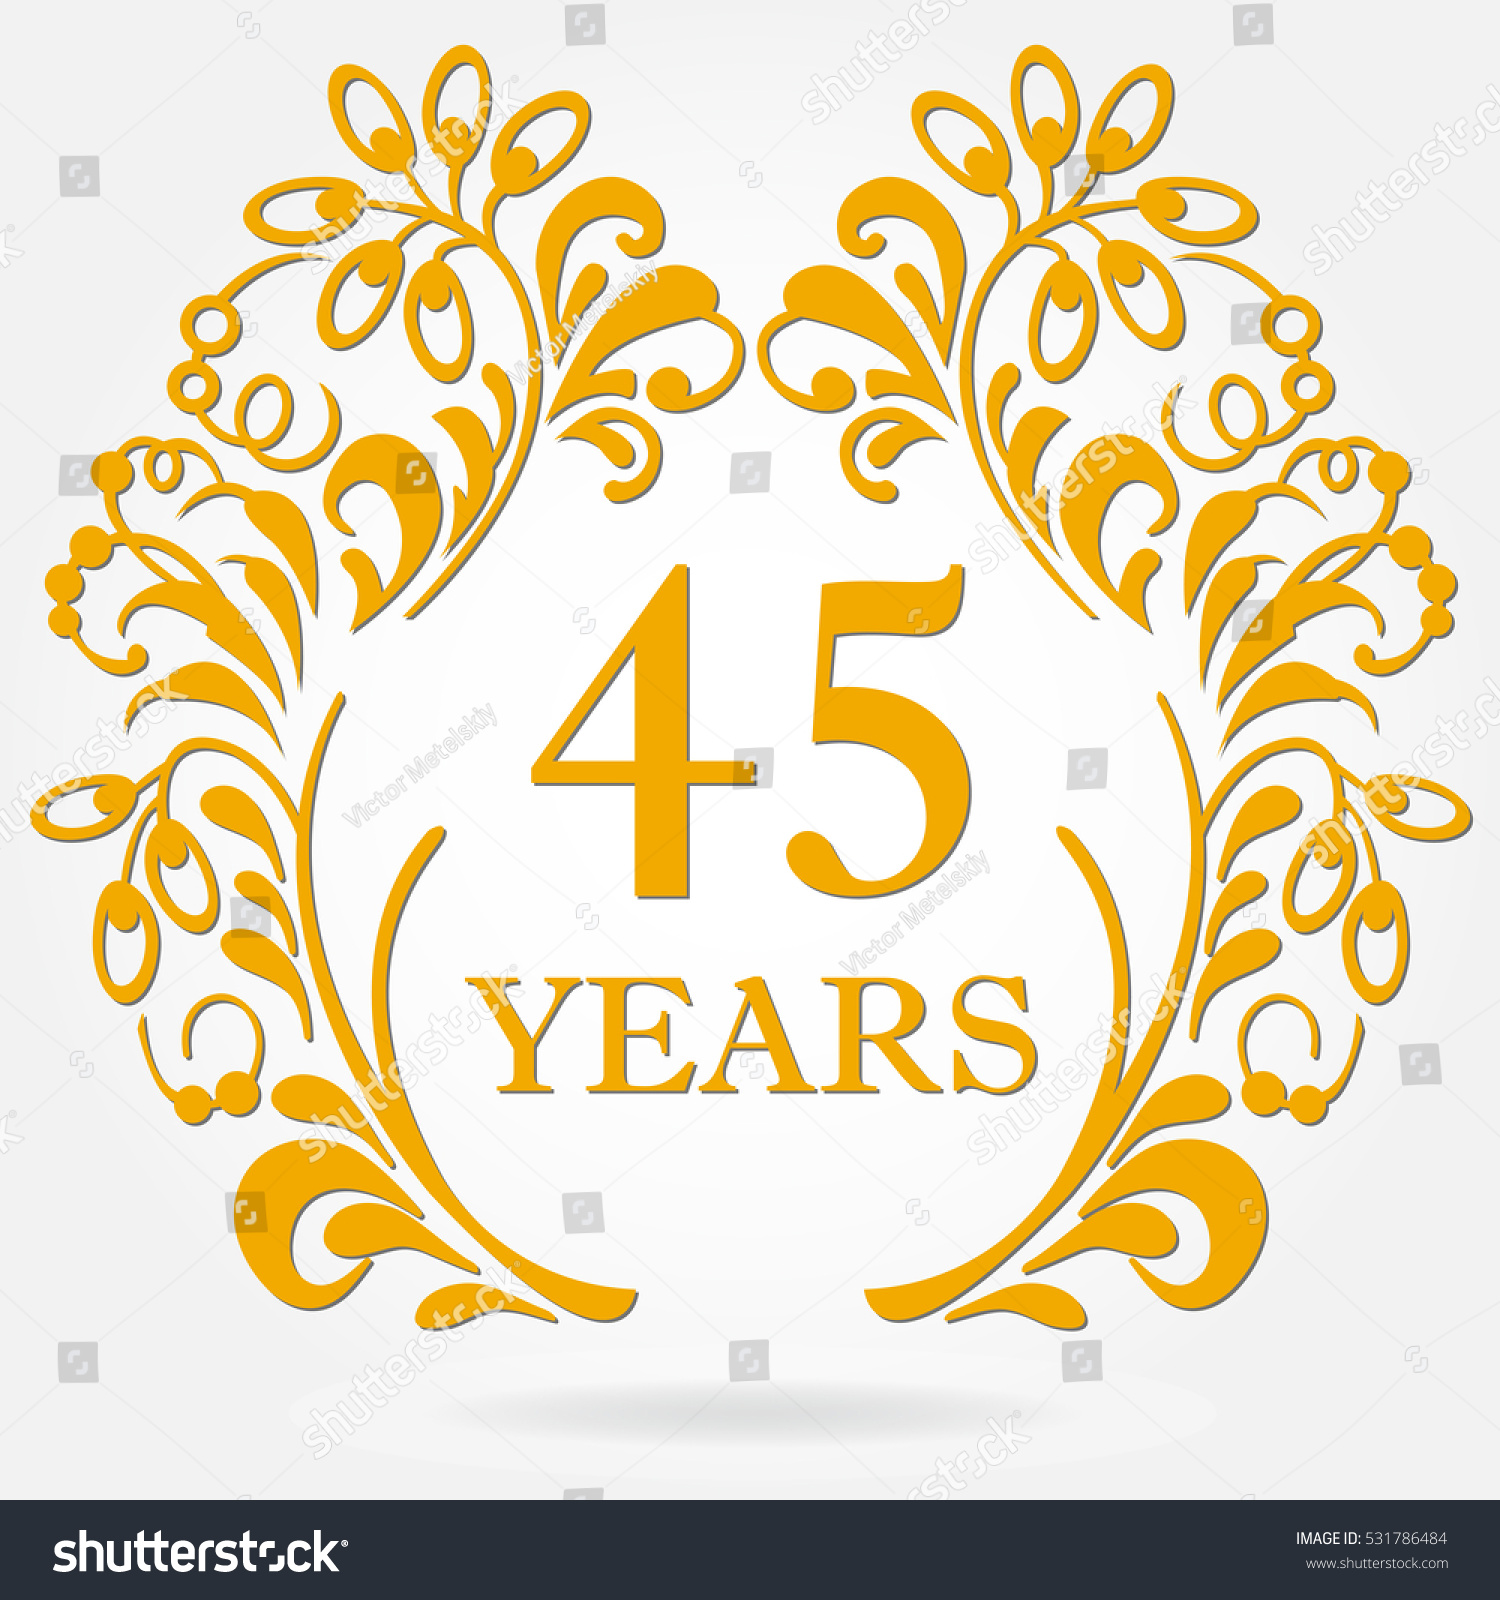  45  Years  Anniversary  Icon Ornate Frame Stock Vector 